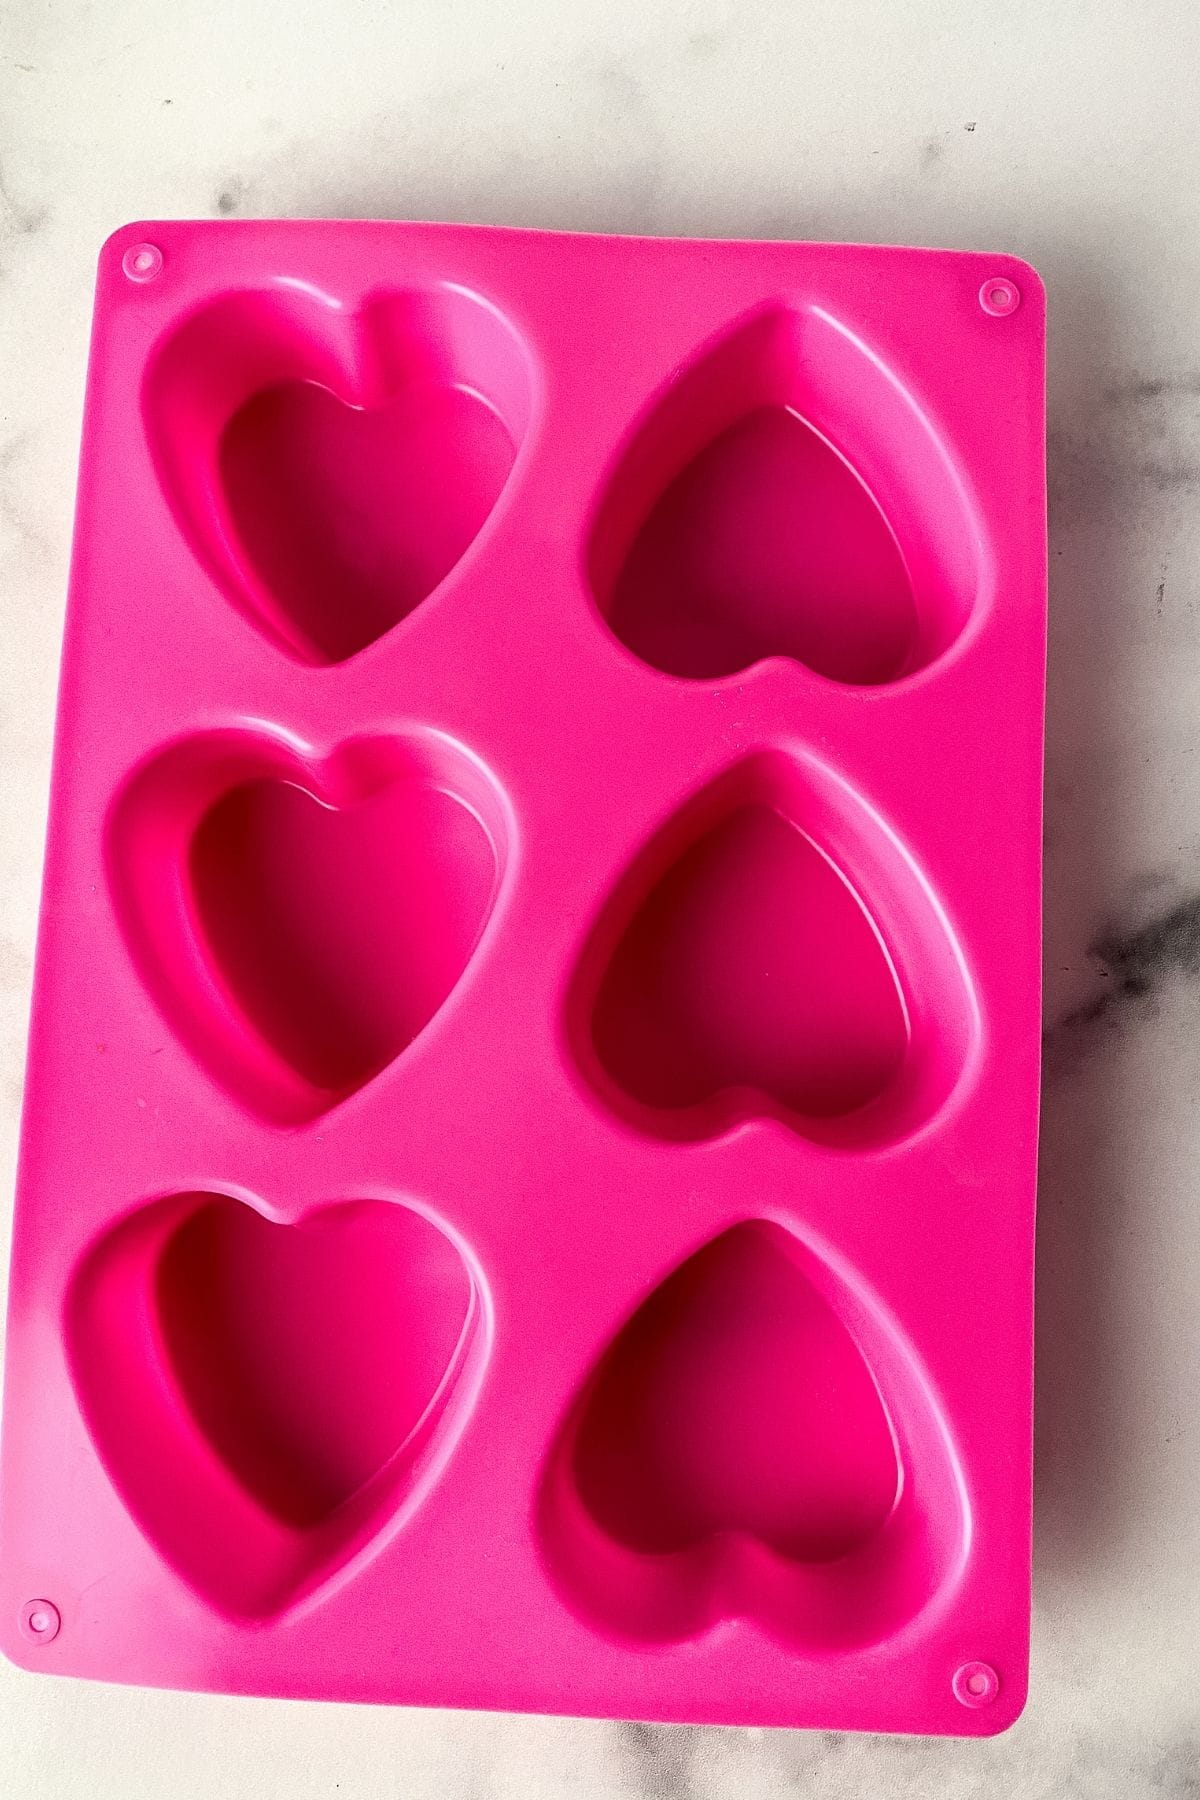 Heart shaped silicone mold